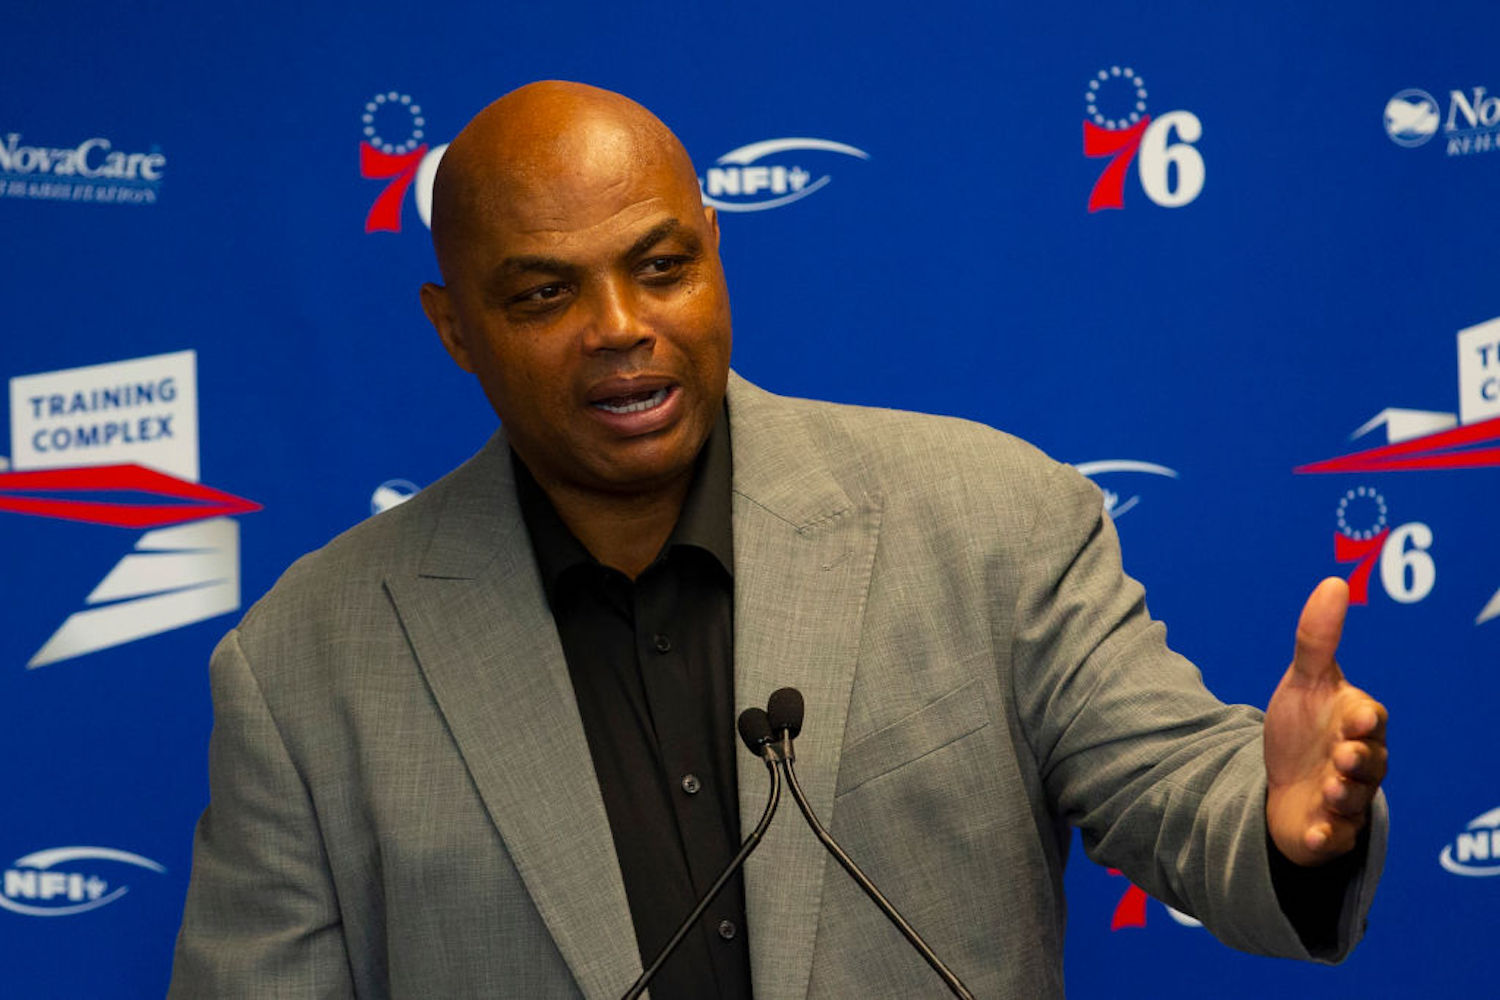 Charles Barkley only has one betting loss over the last few Super Bowls, but the Falcons' collapse cost him $100,000 in 2017.